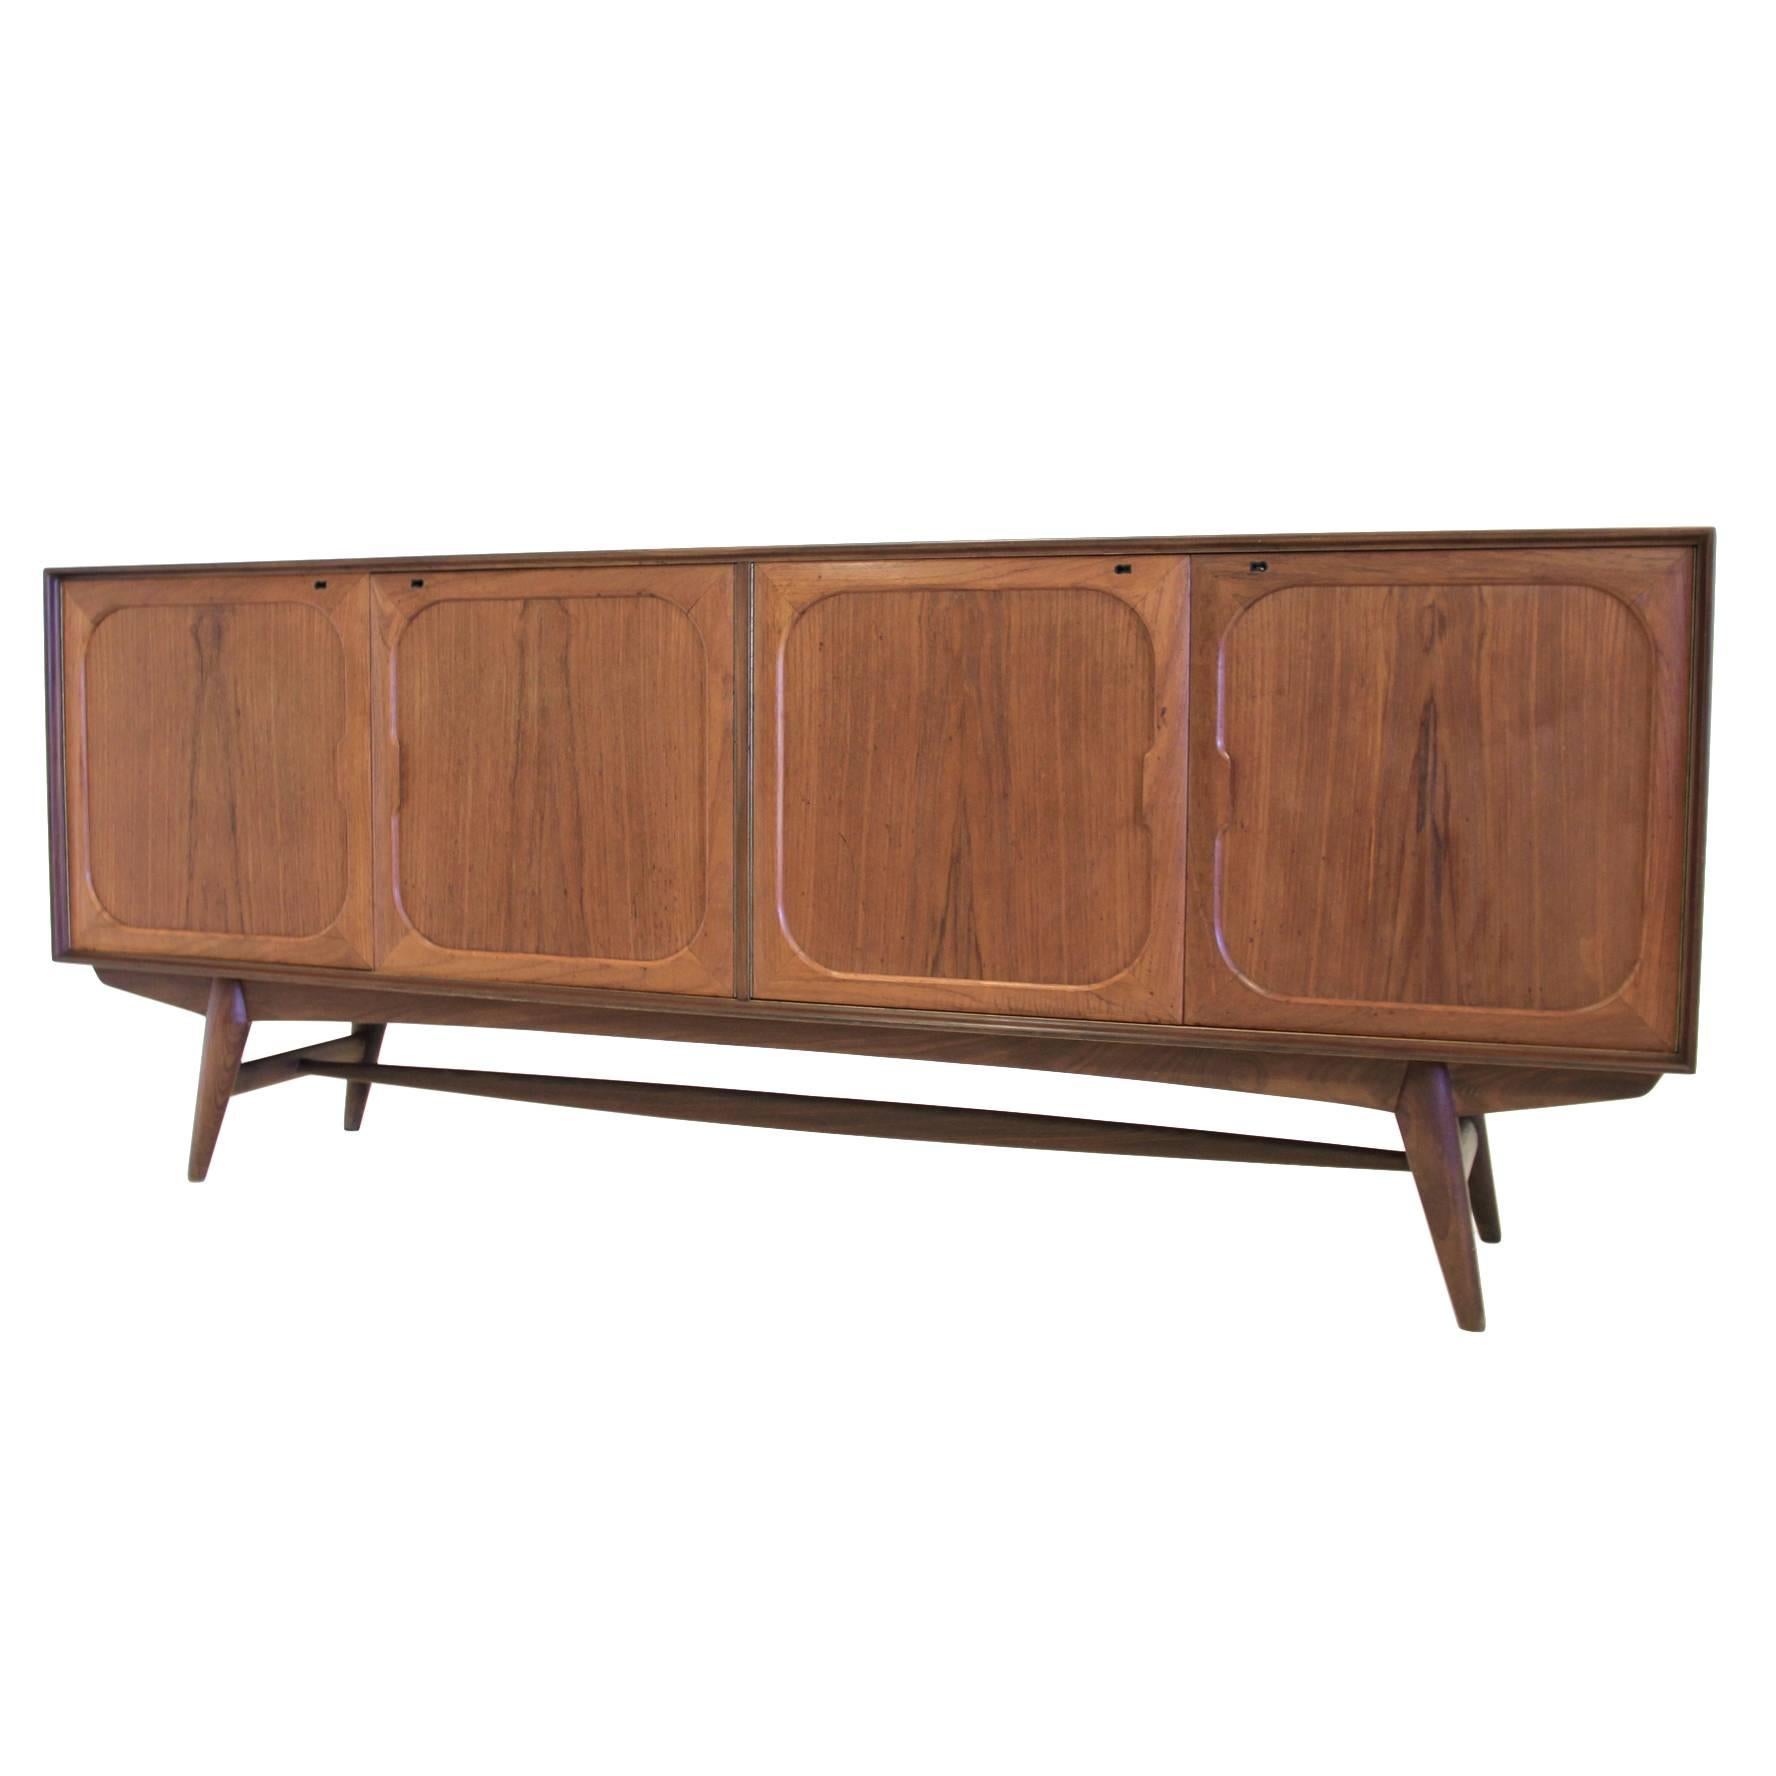 Important Sideboard by Adolf Relling and Rolf Rastad